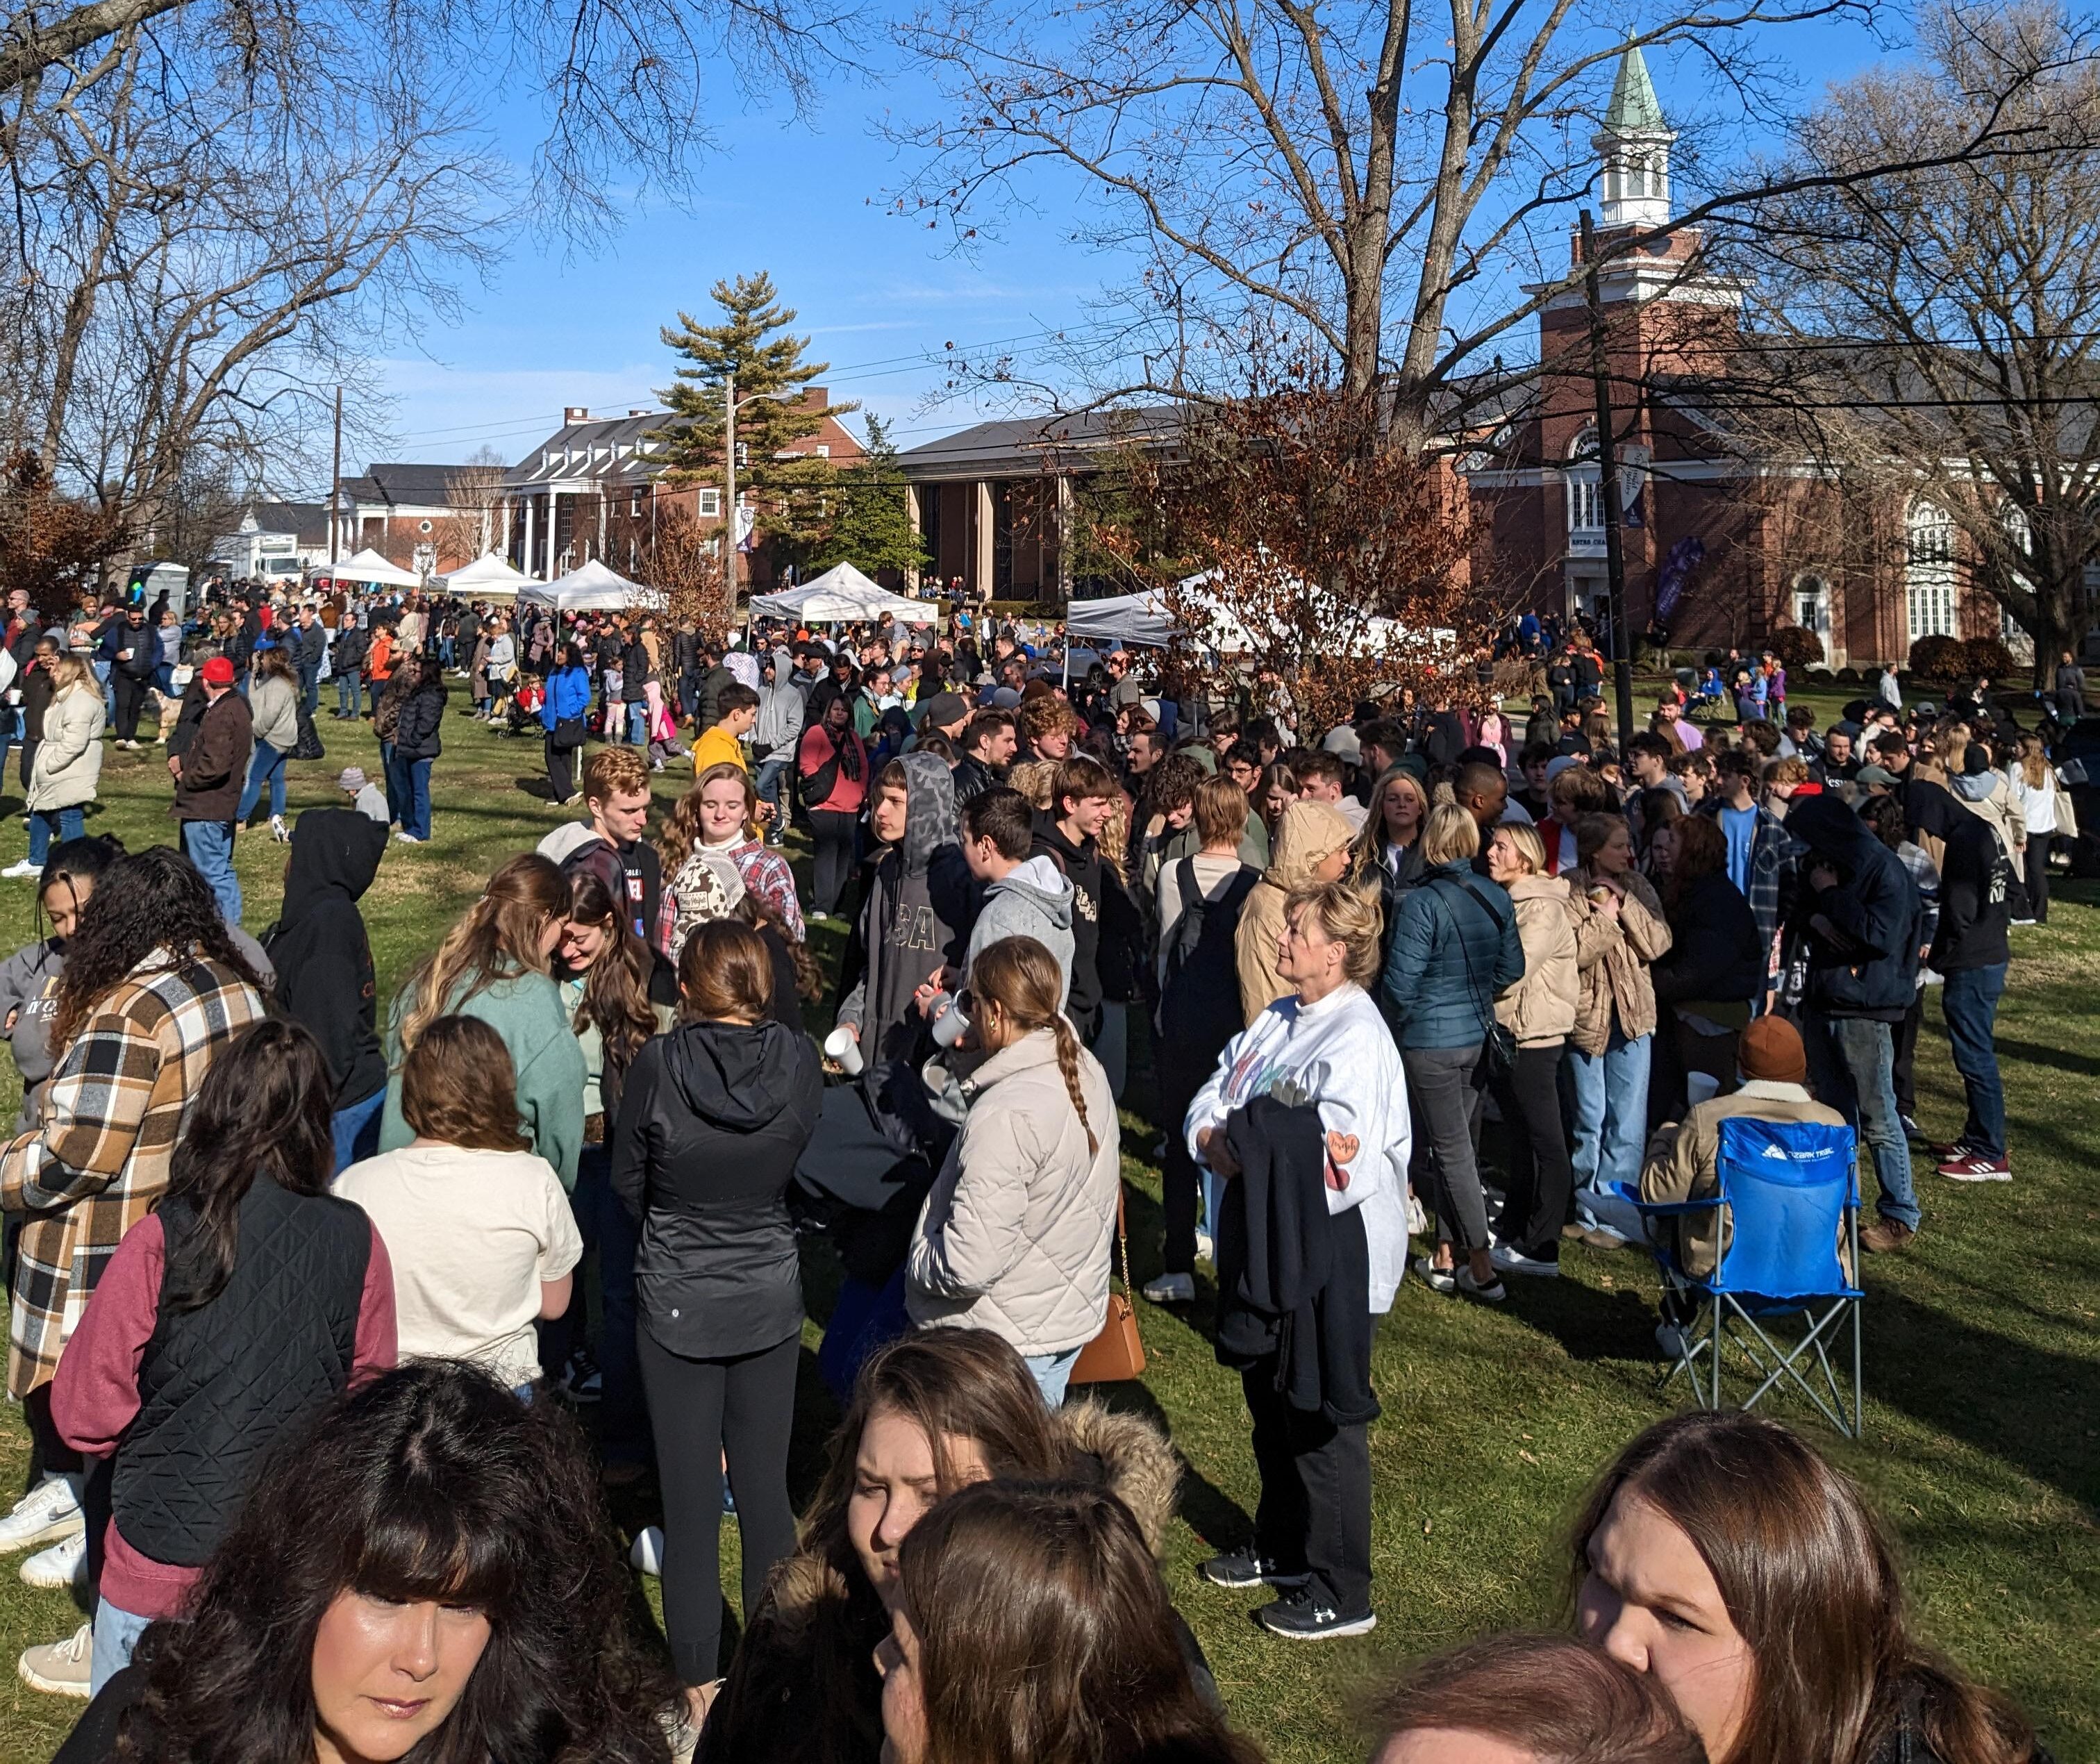 Someone who attended the ‘large spiritual revival’ at Asbury University has measles